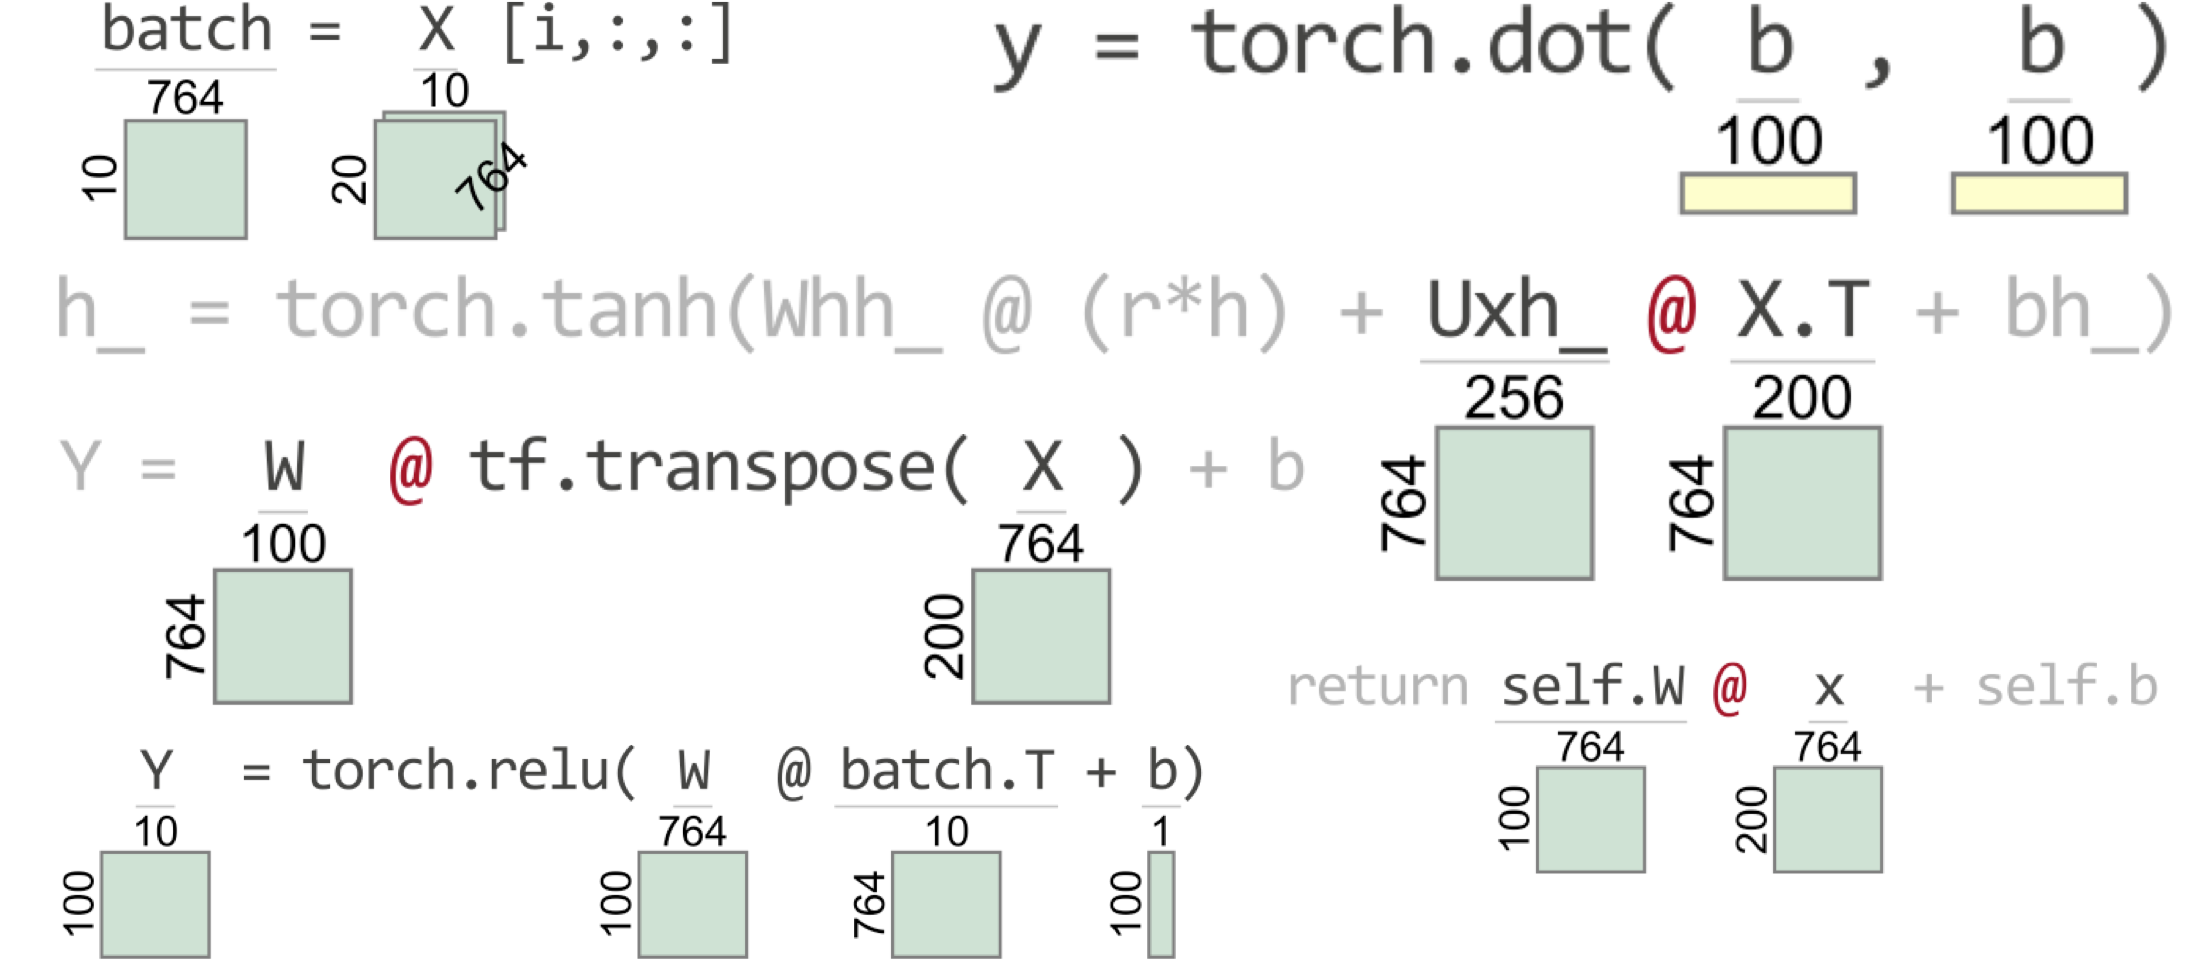 Clarifying exceptions and visualizing tensor operations in deep